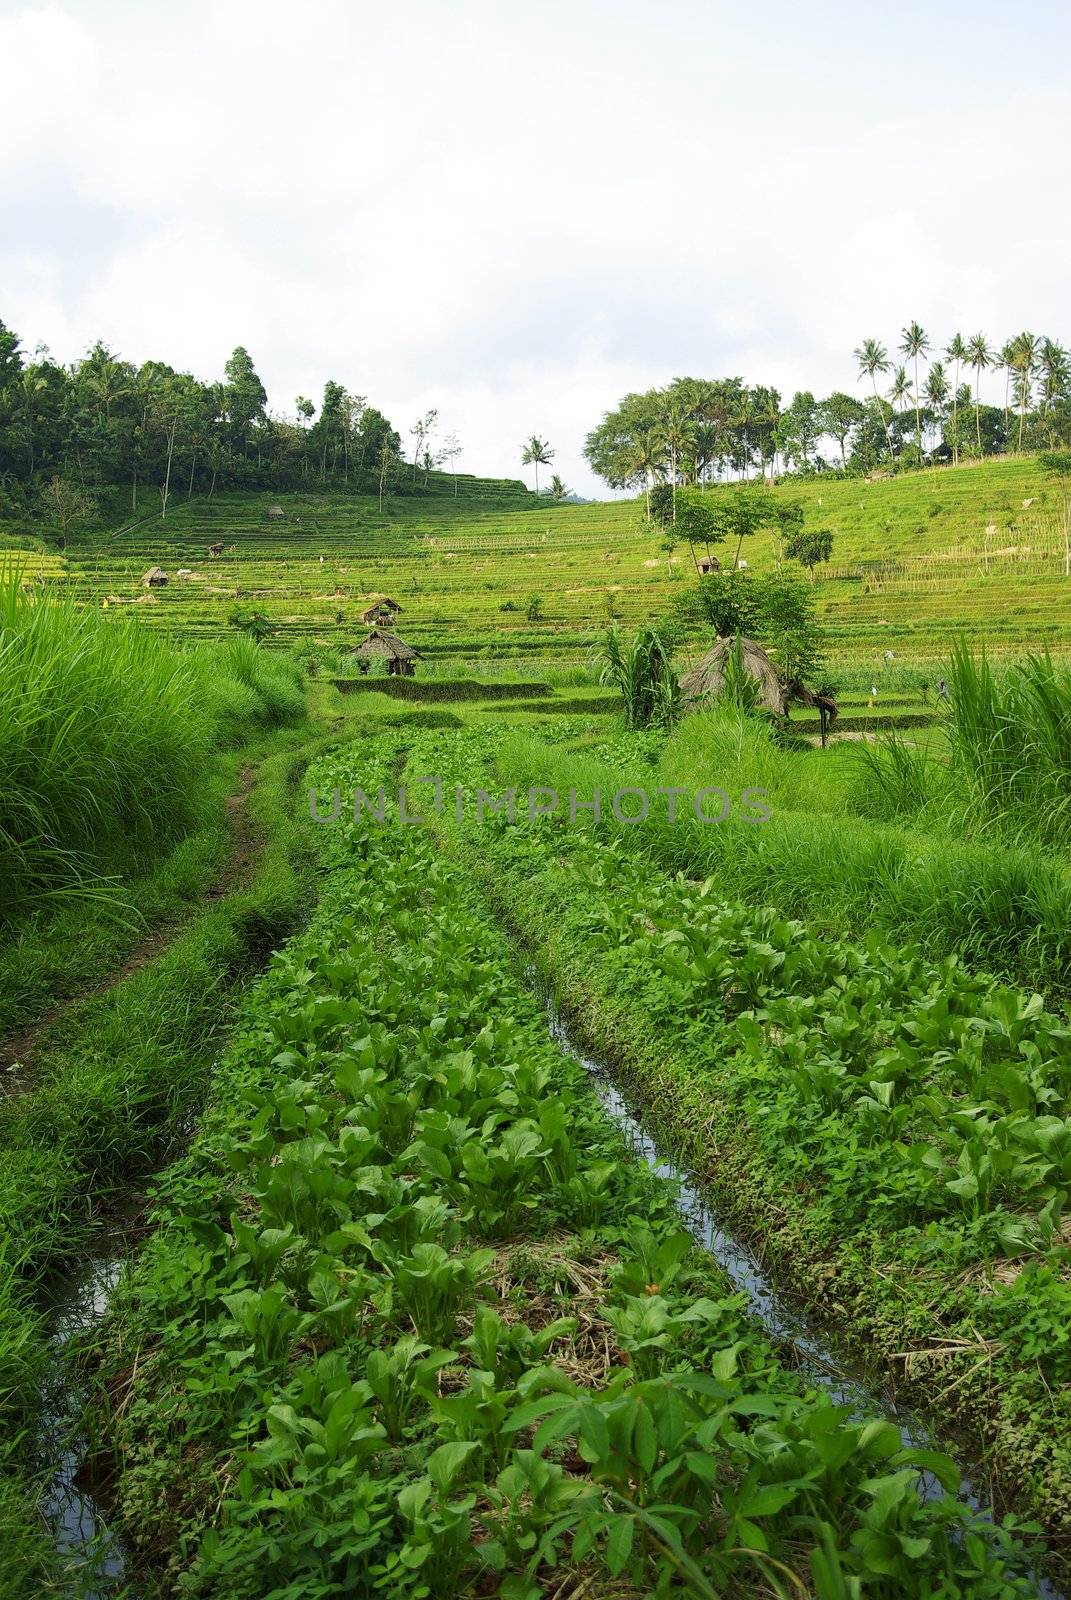 A typical landscape in Bali island : terrace ricefields and palms.